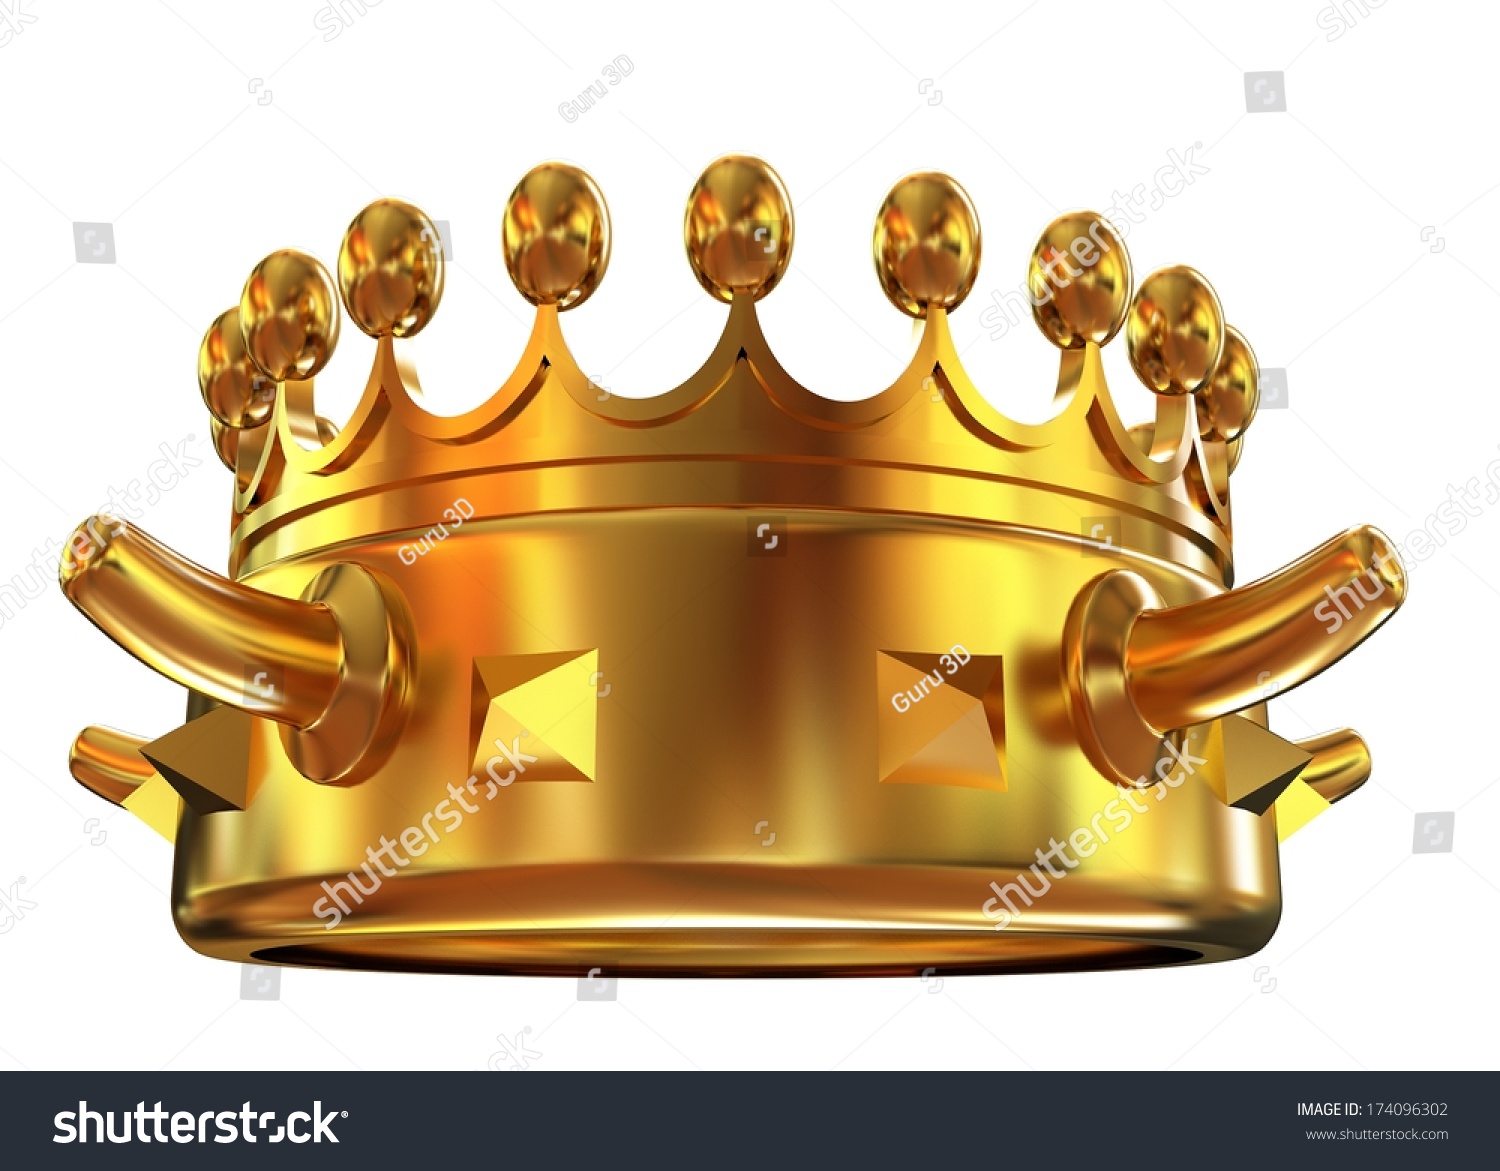 Gold Crown Isolated On White Background Stock Illustration 174096302 ...